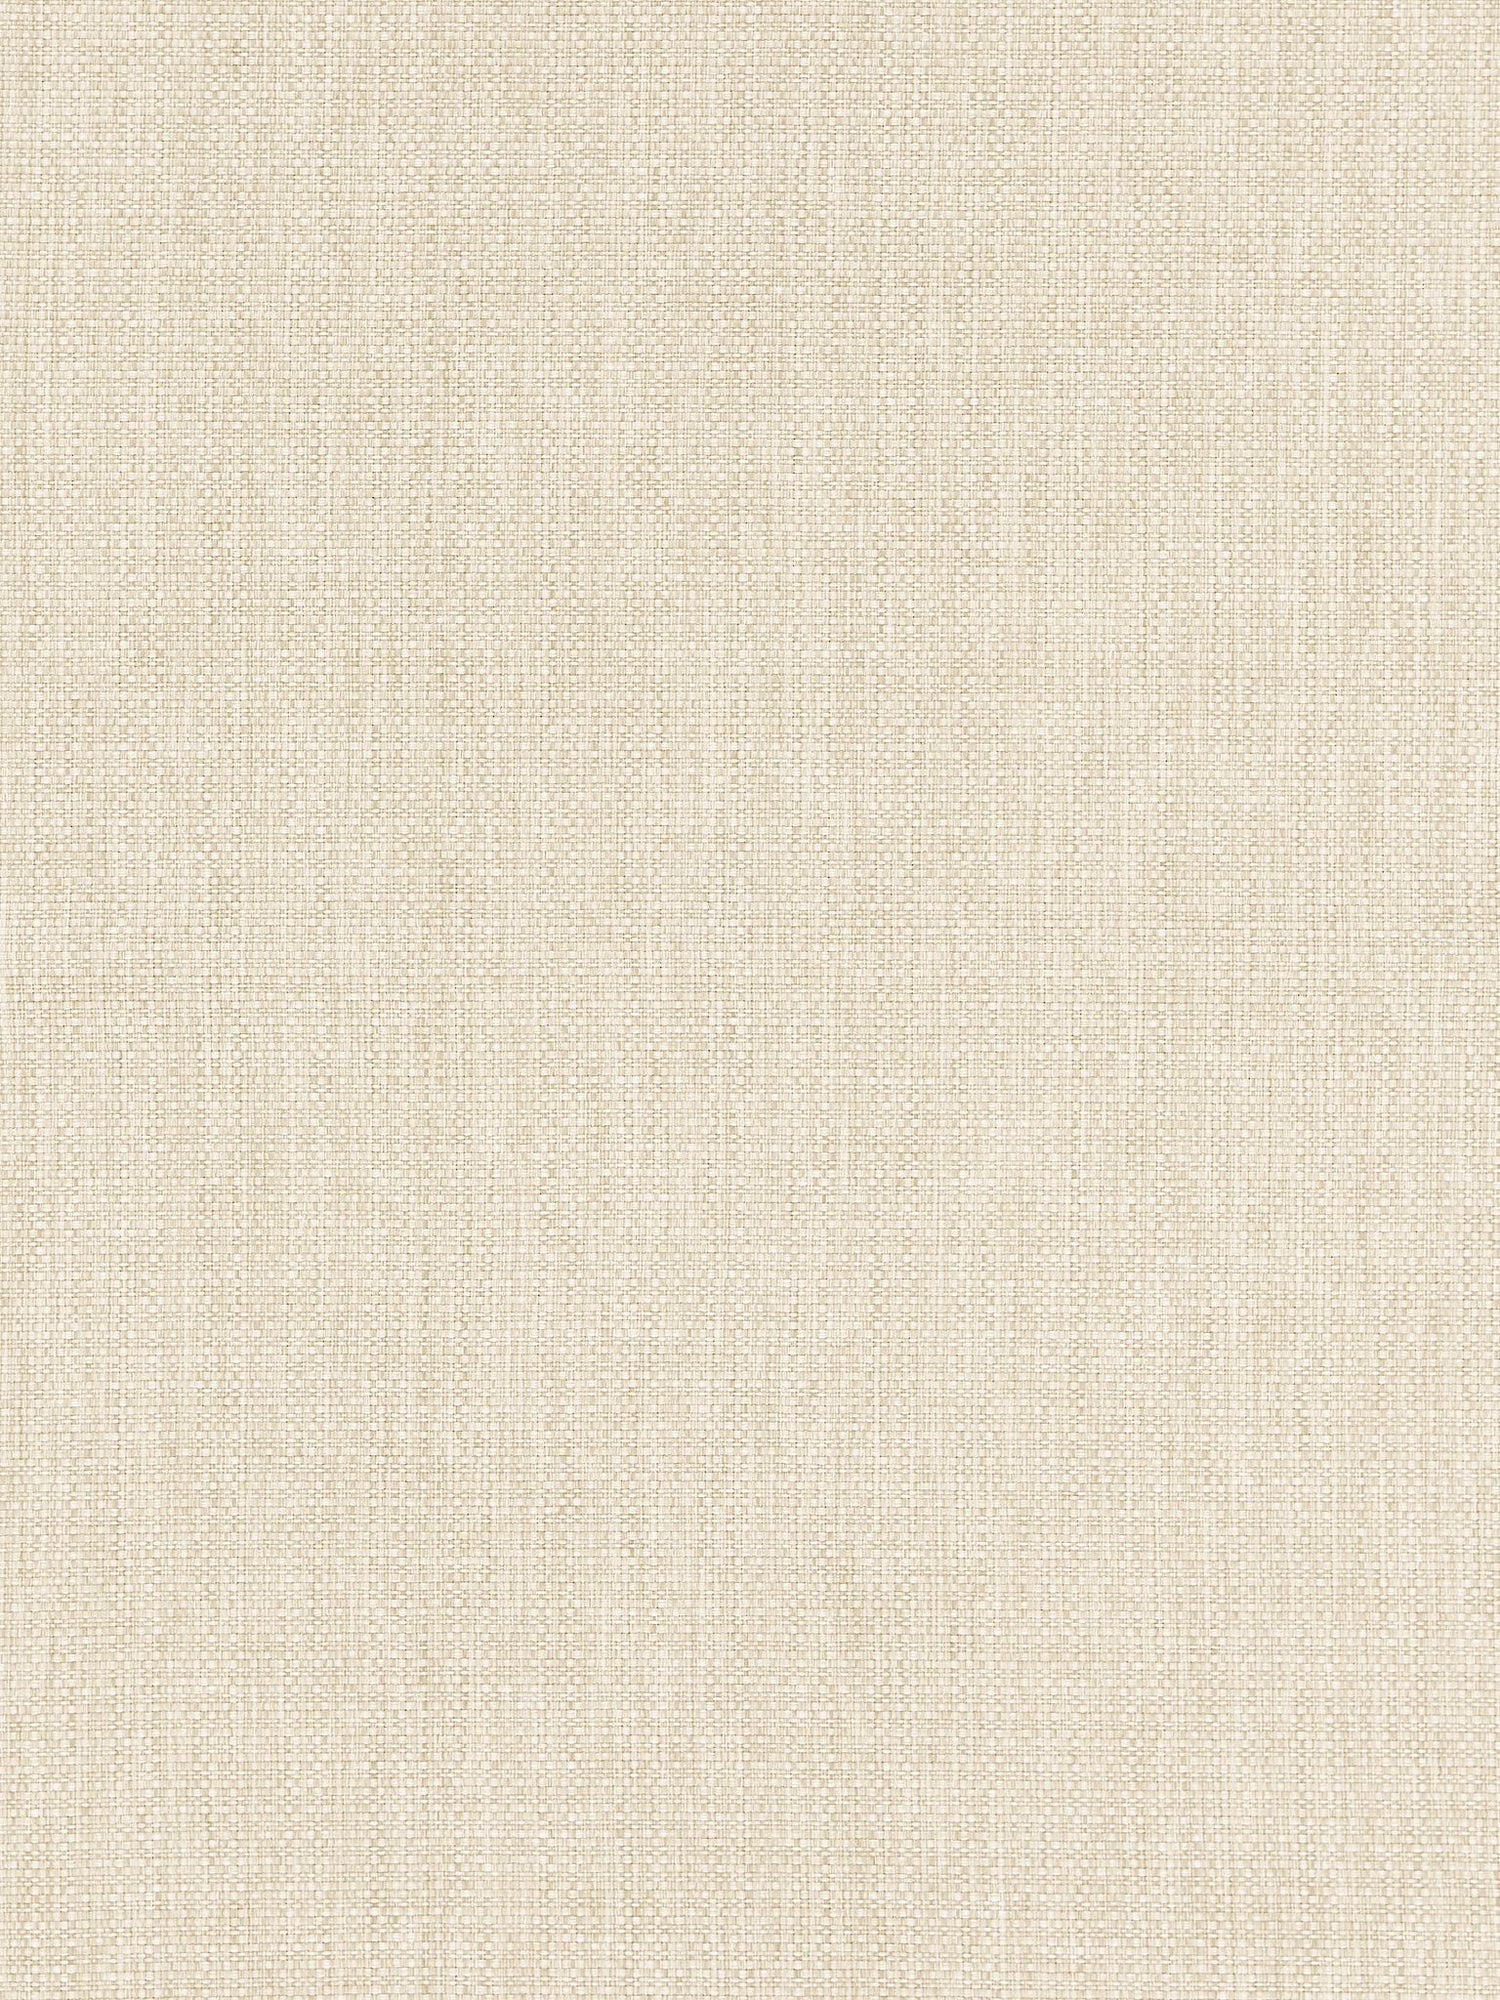 Tahiti Tweed fabric in linen color - pattern number SC 000127192 - by Scalamandre in the Scalamandre Fabrics Book 1 collection